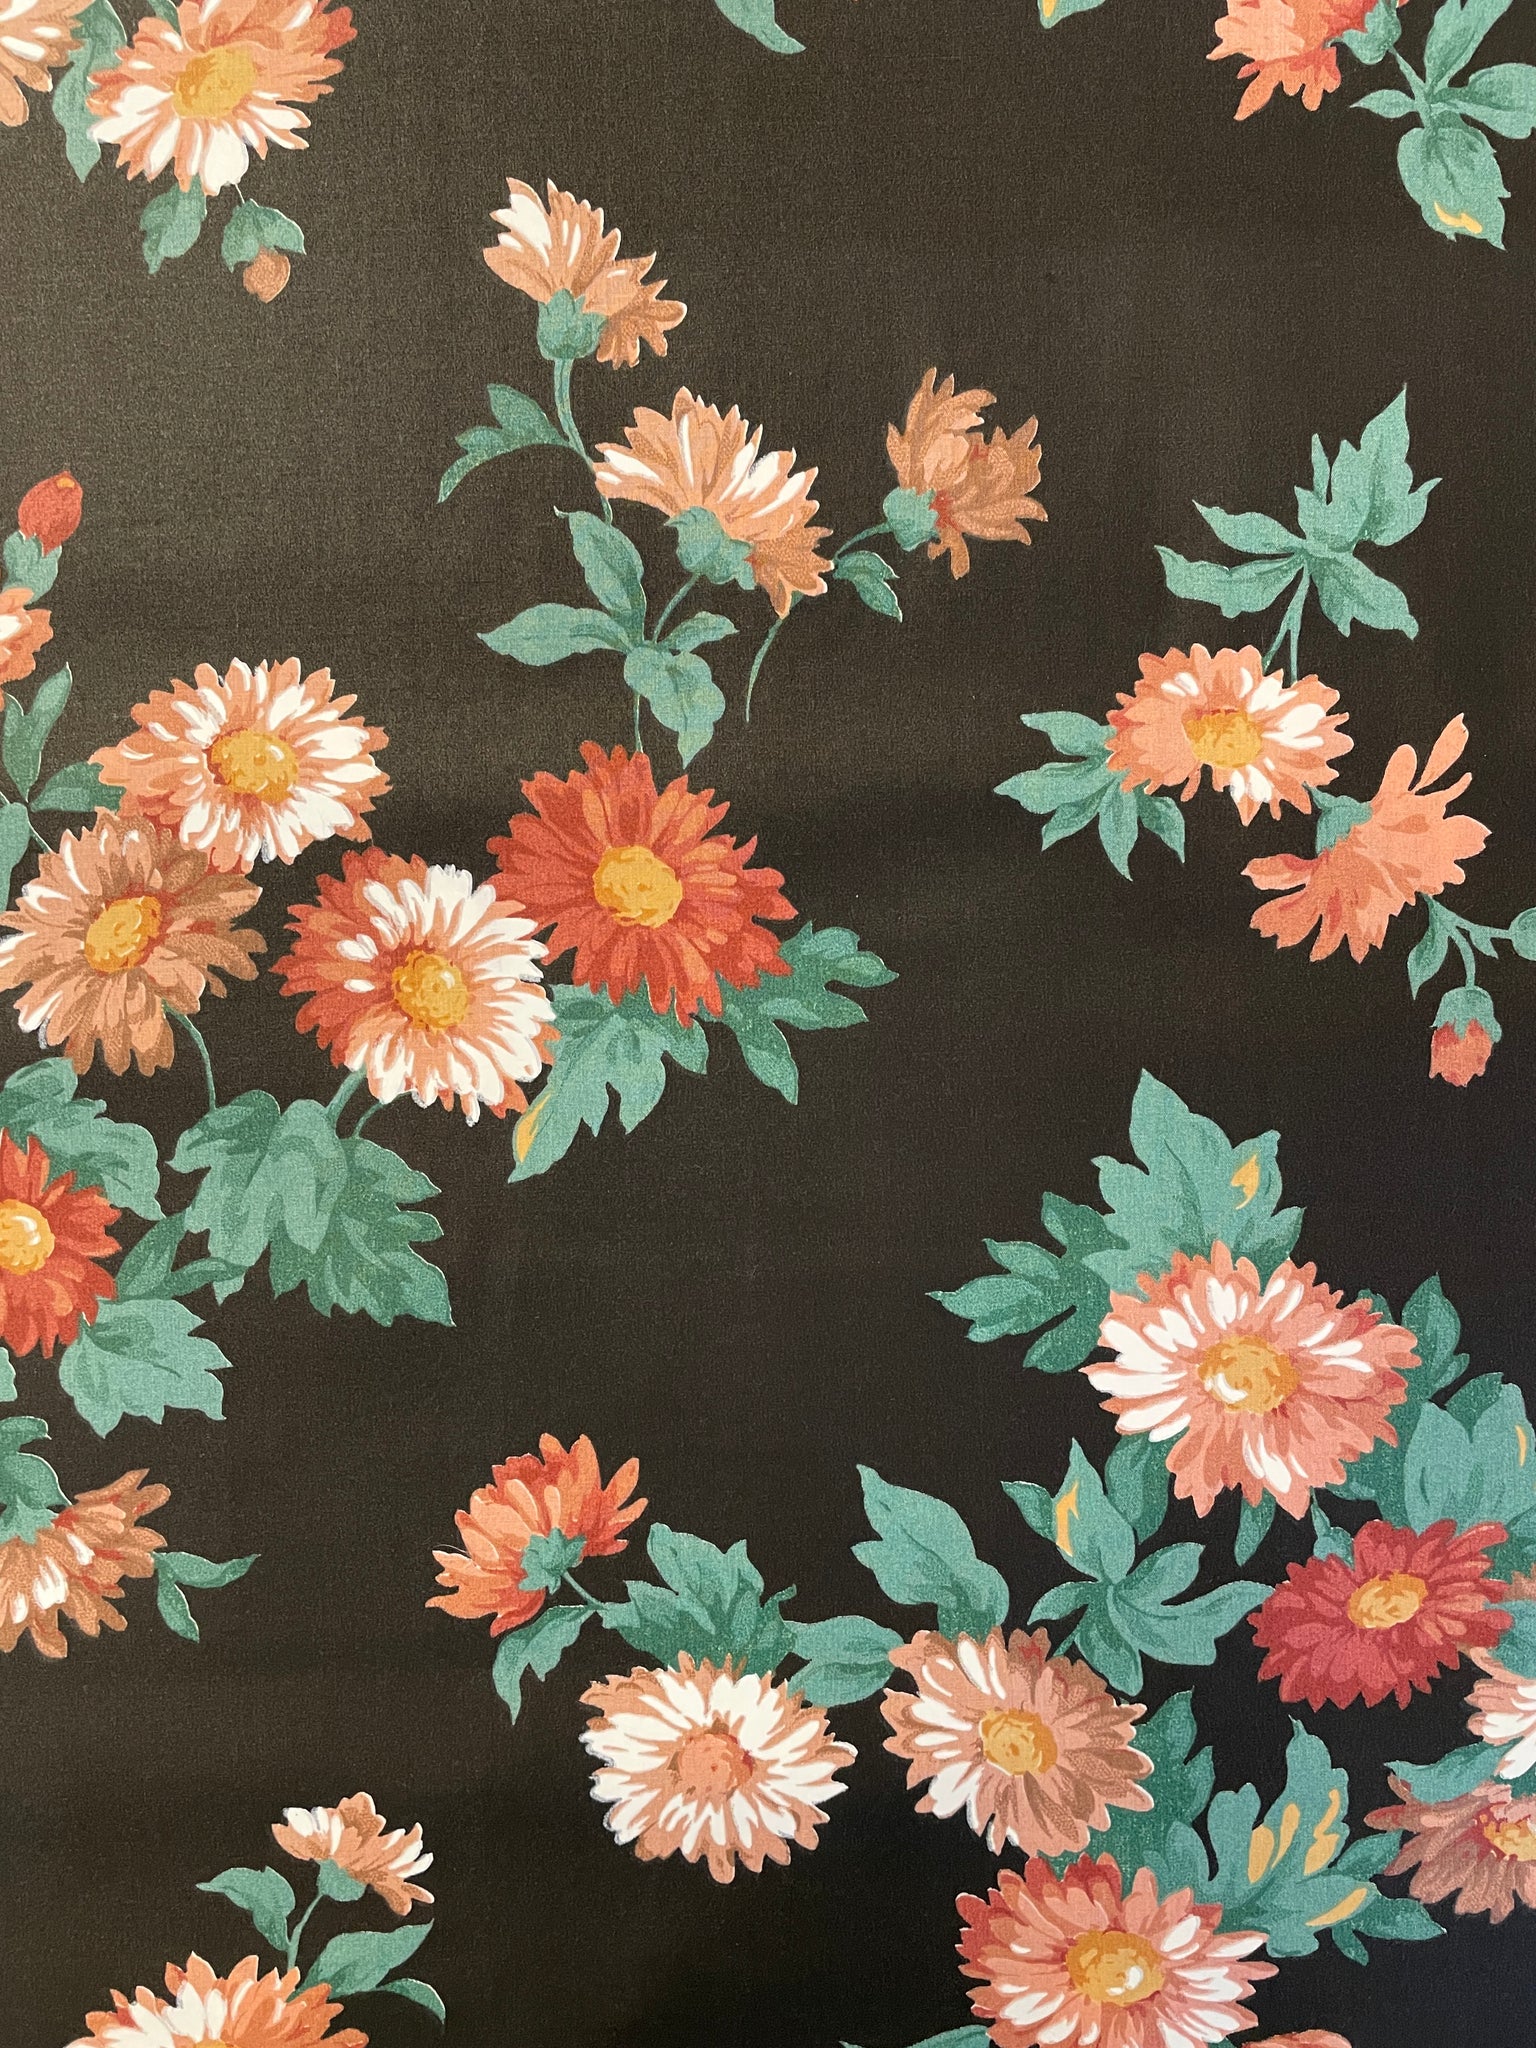 SALE Quilting Poly Cotton - Tan and Beige Daisies Black